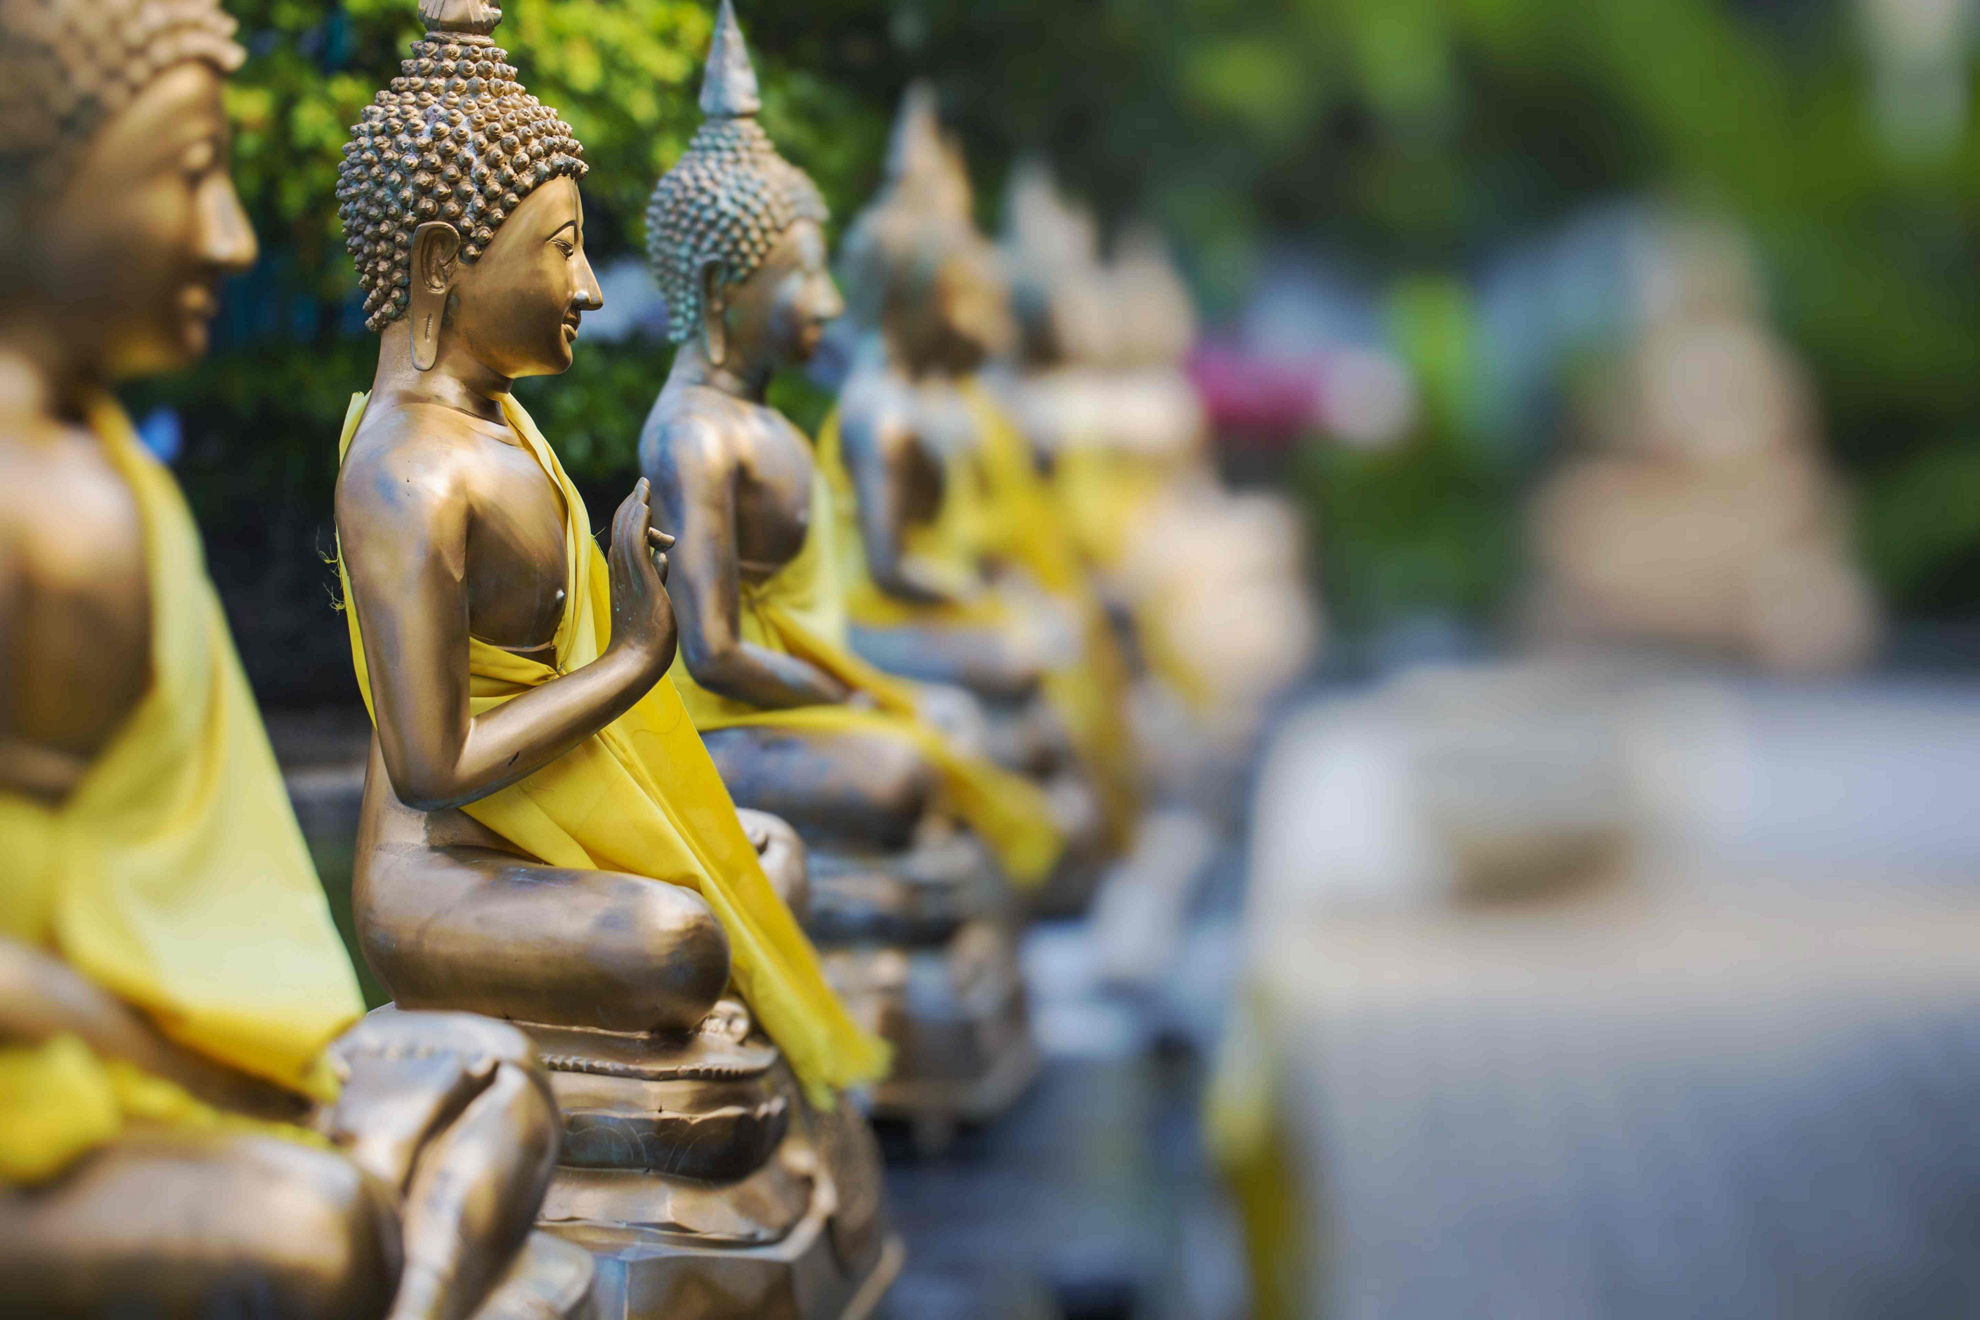 Relaxing holiday destinations: A row of bronze Buddha statues lined up outside